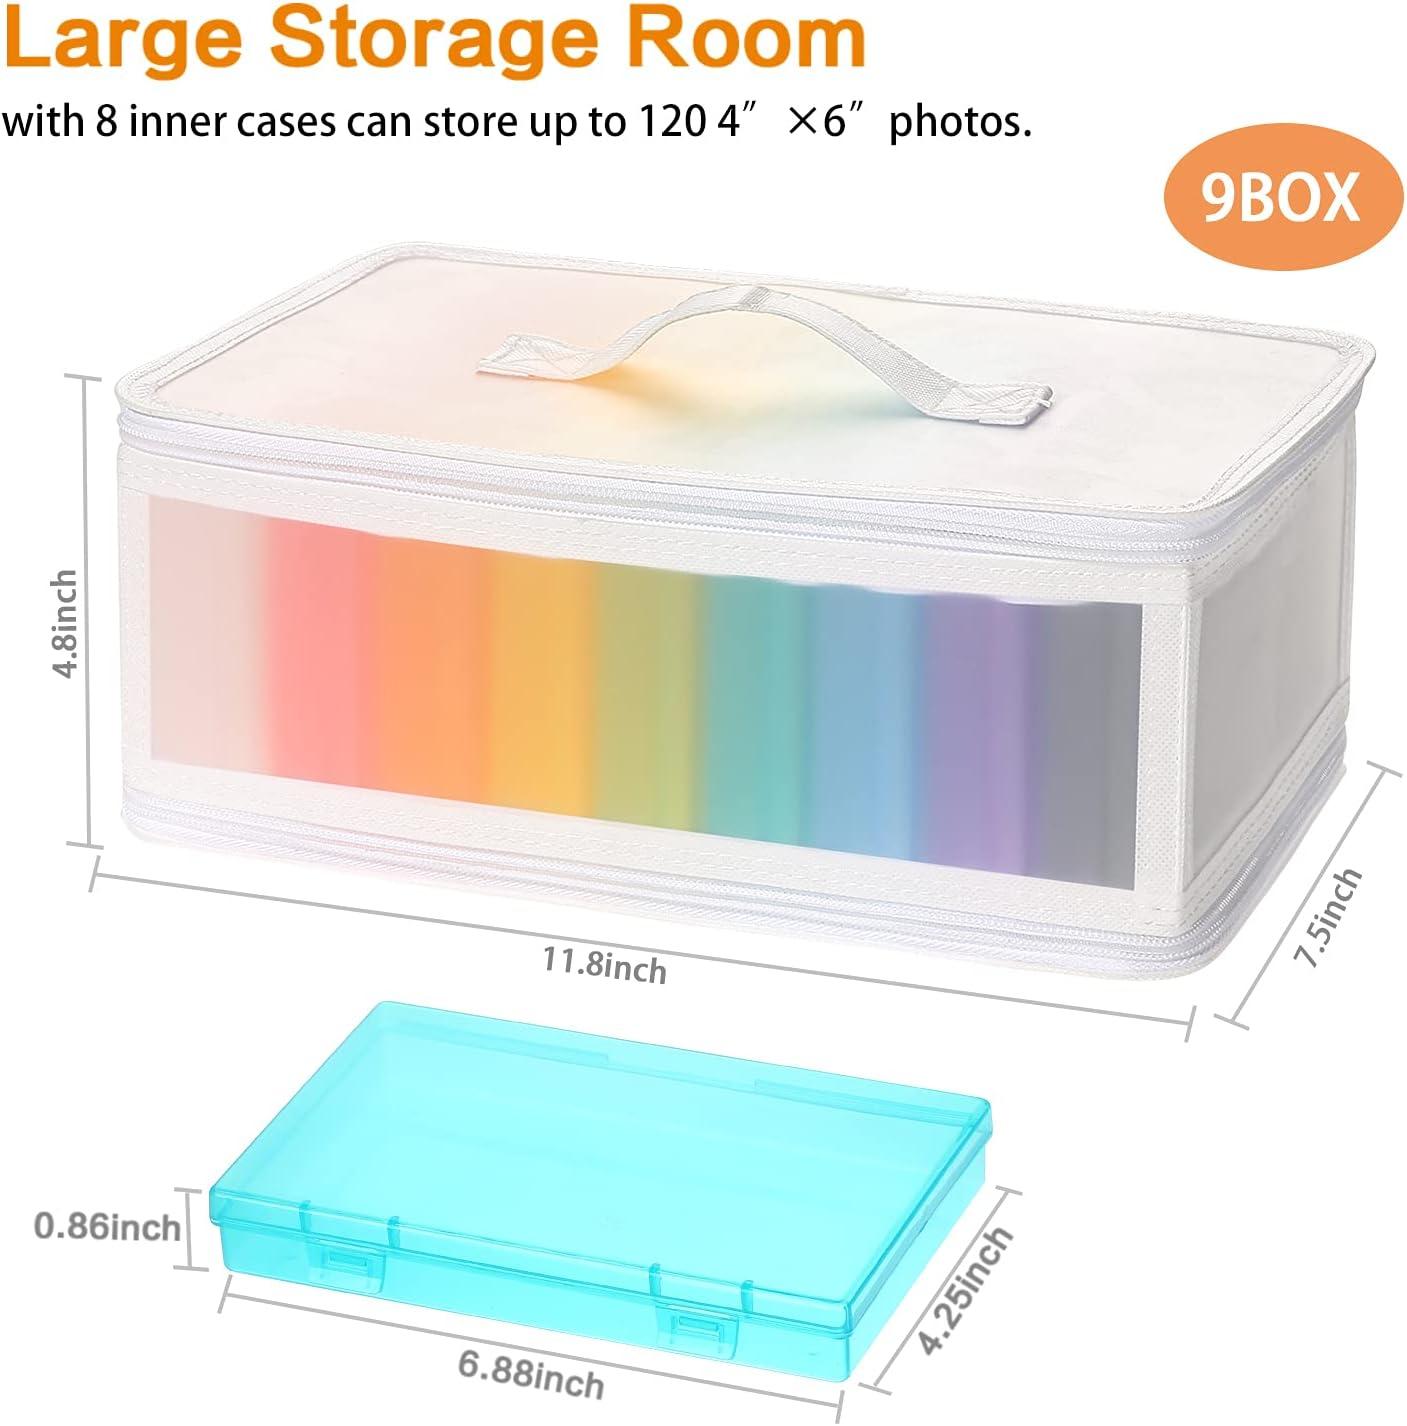 BUG HULL Large 5x7 Photo Storage Box, 8 Inner Photo Cases Store up to